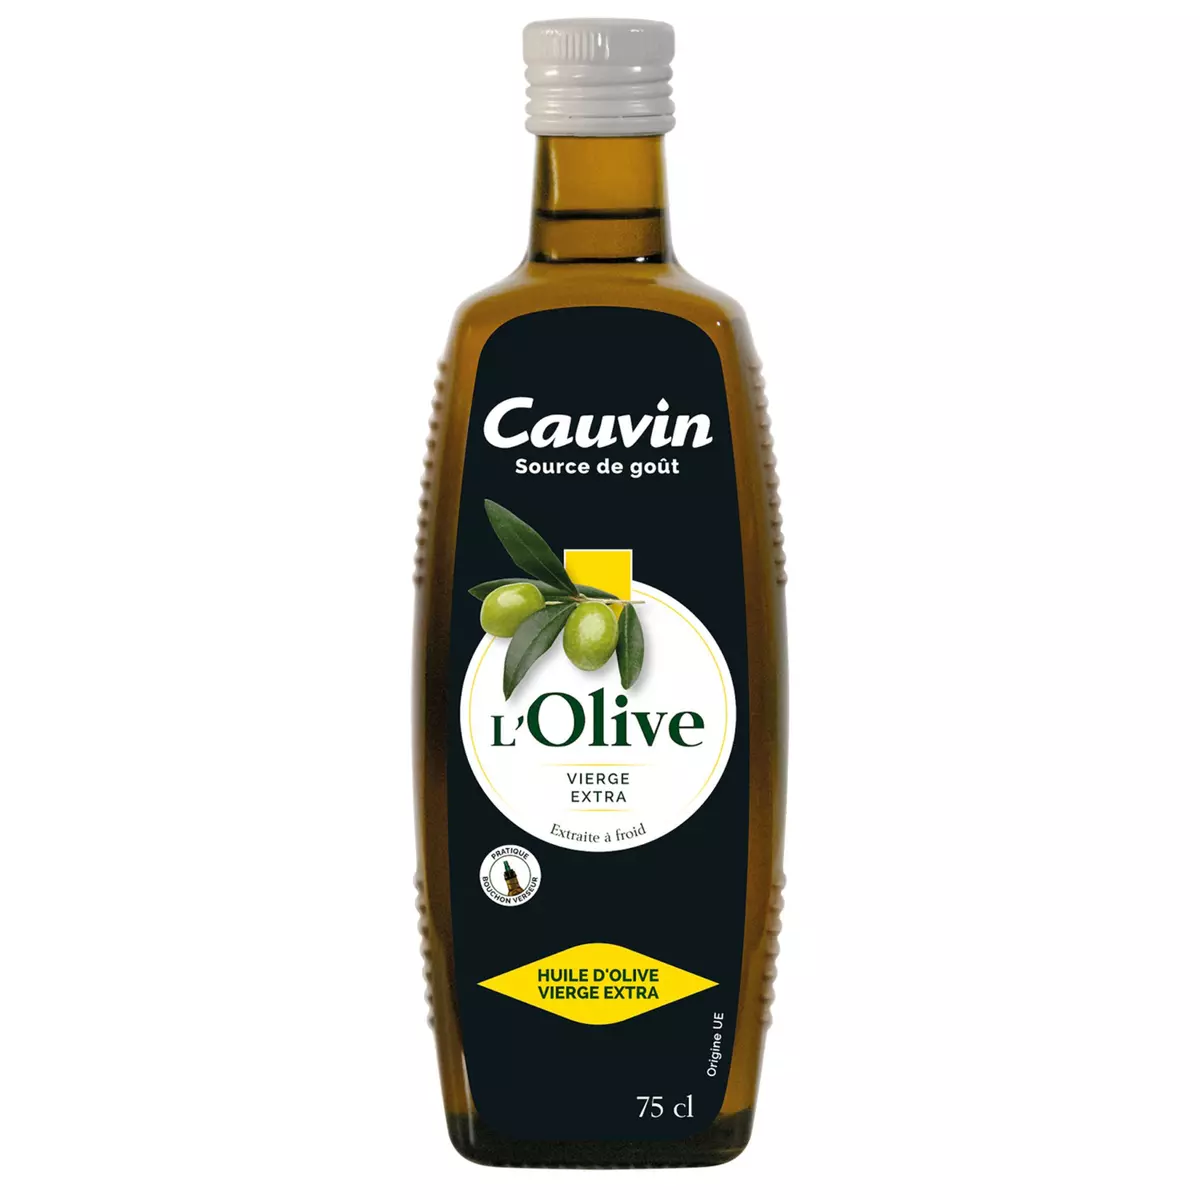 CAUVIN Huile d'olive vierge extra extraite à froid 75cl